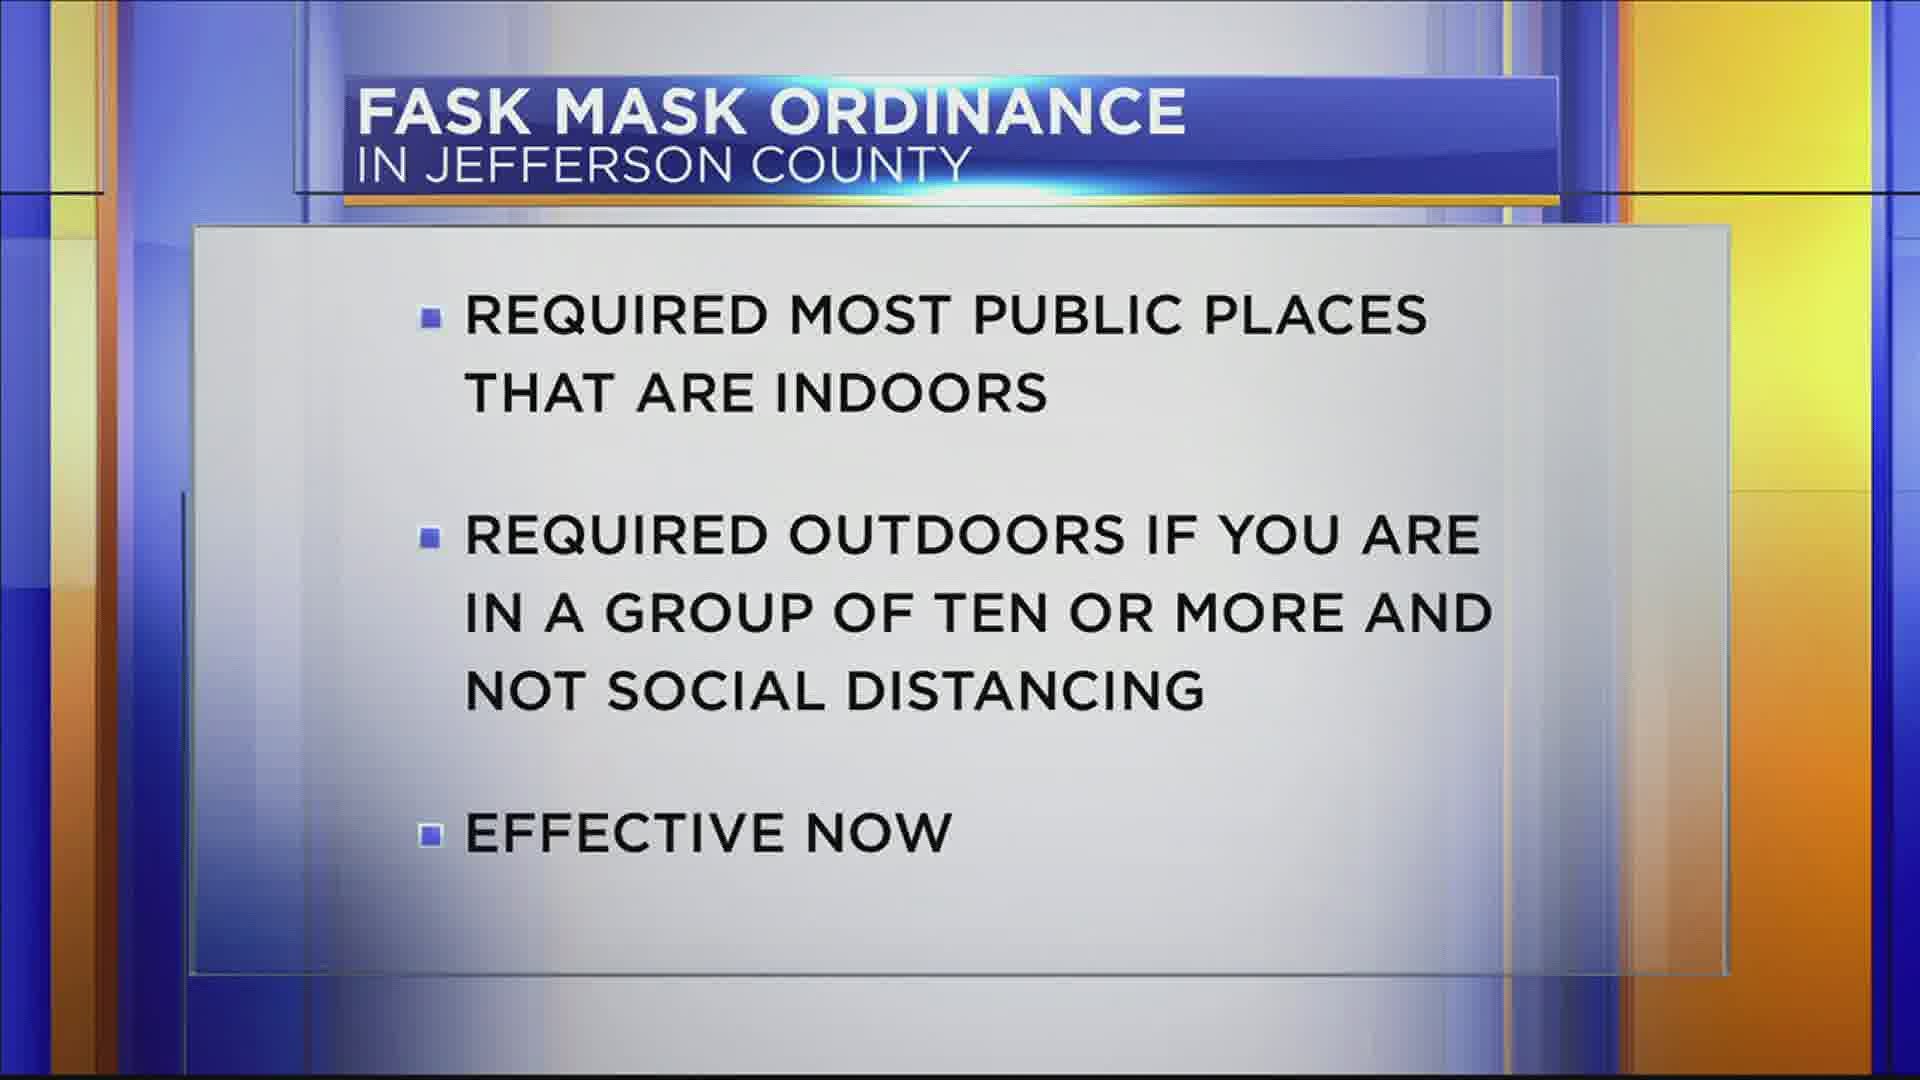 Effective June 29, 2020, public establishments in Jefferson County will require persons to wear a face covering by order of the Jefferson County Health Officer.